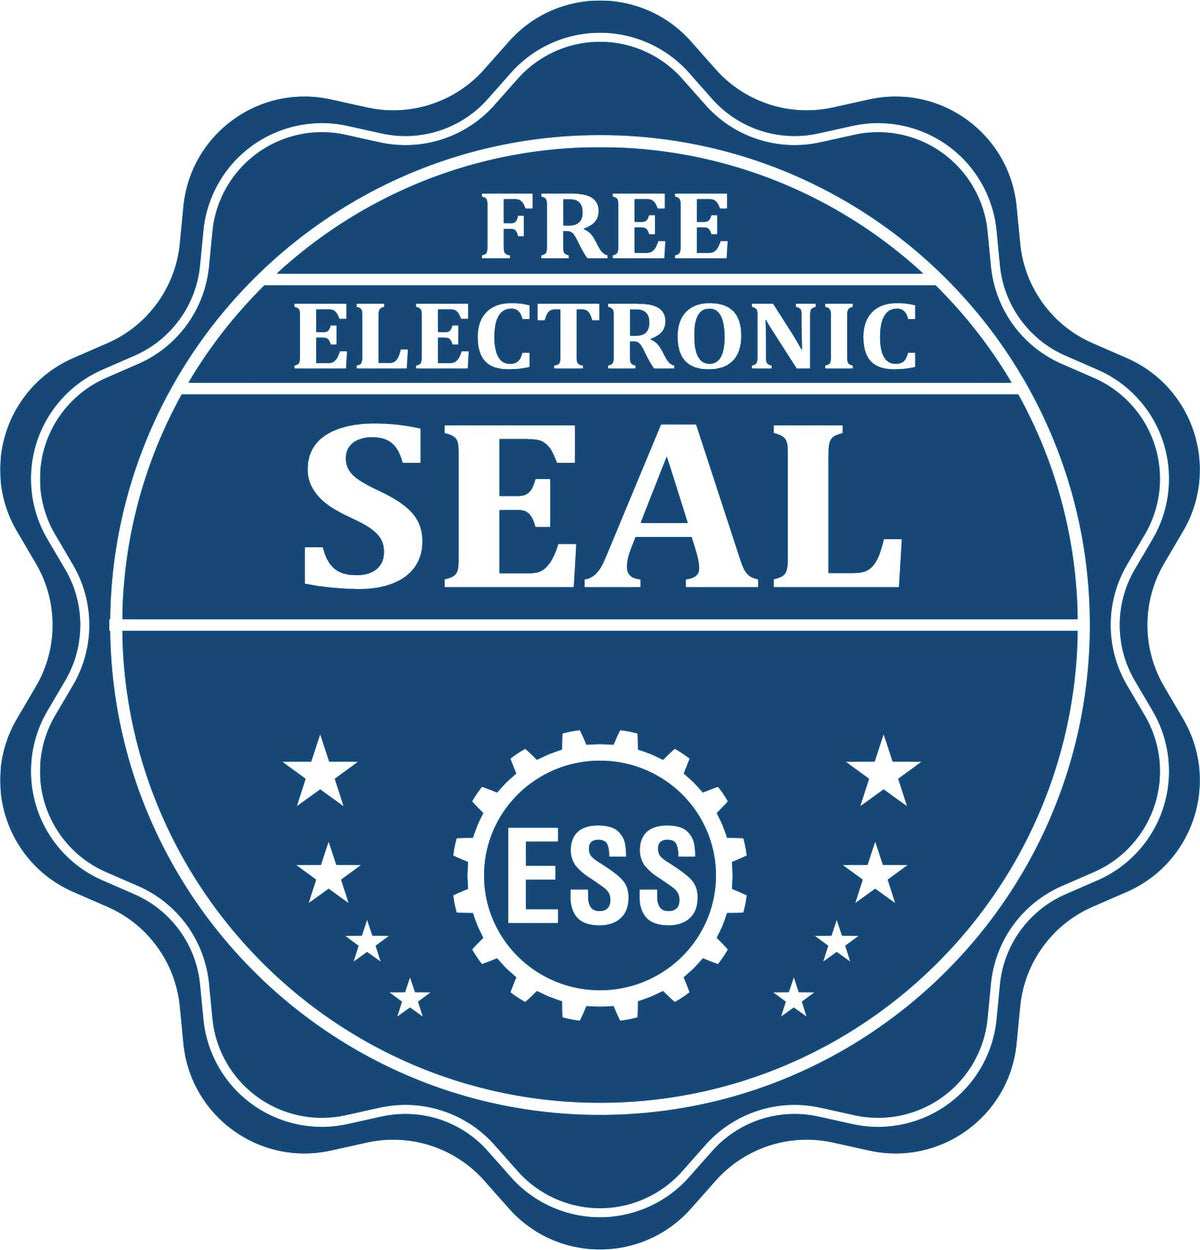 A badge showing a free electronic seal for the Gift Maryland Land Surveyor Seal with stars and the ESS gear on the emblem.